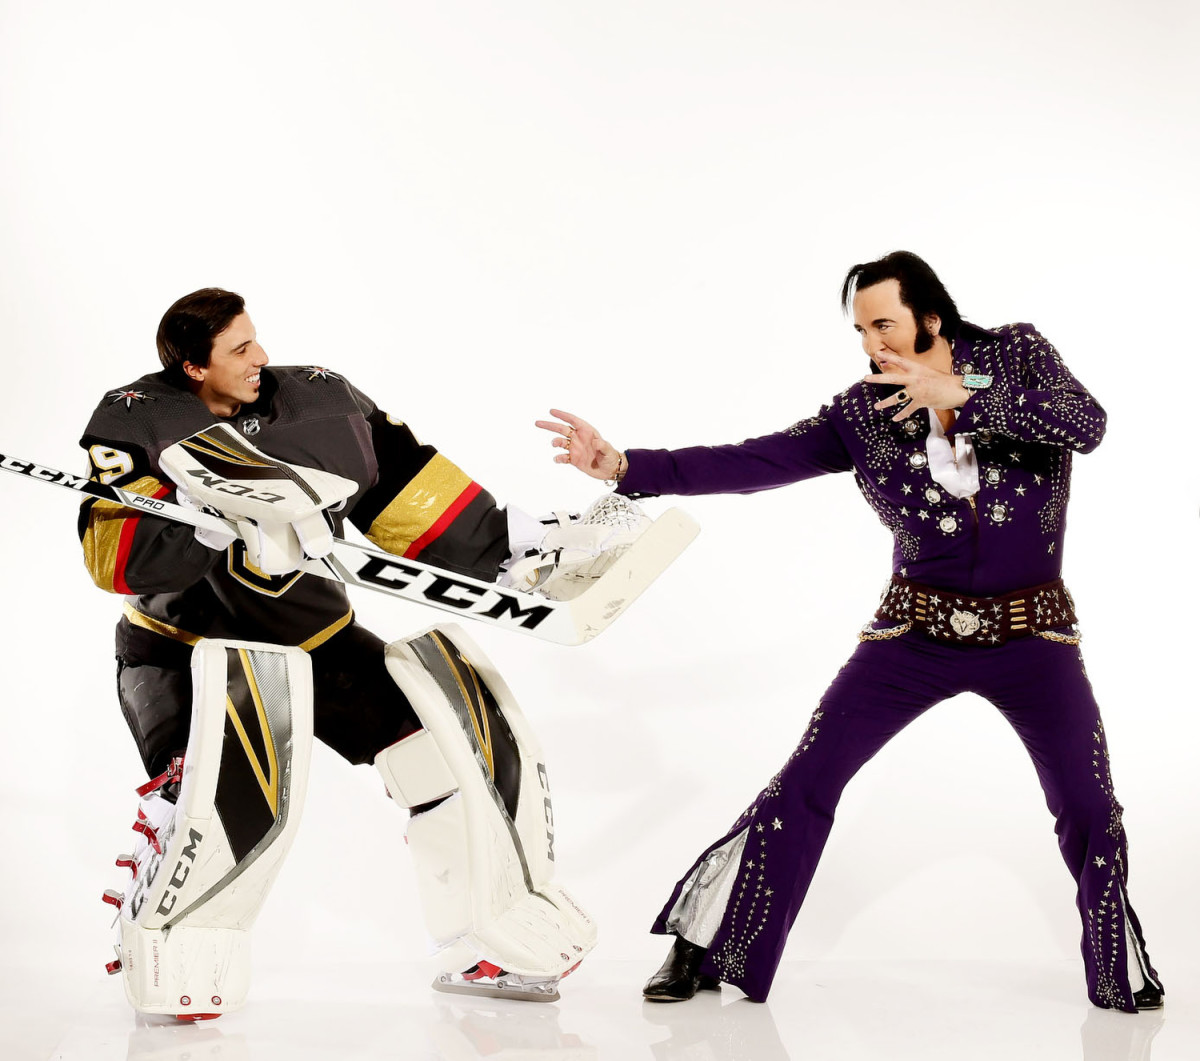 Vegas Golden Knights: Outtakes of Marc-Andre Fleury, Elvis